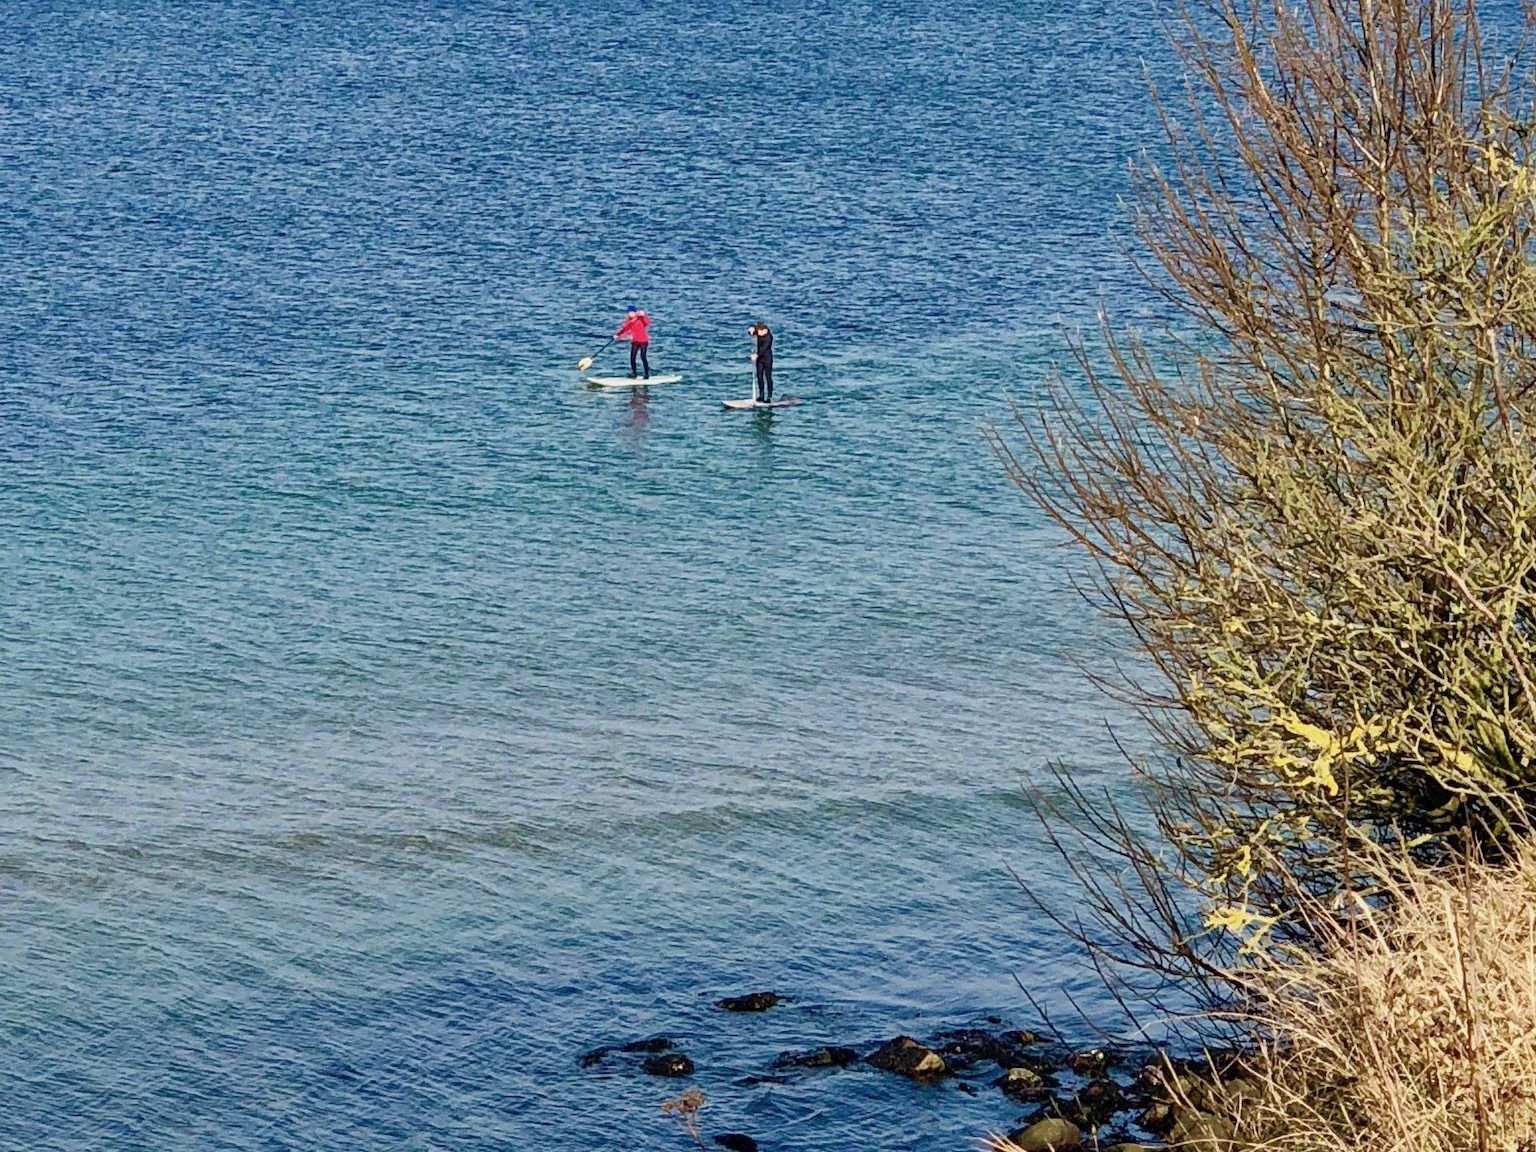 SUP in winter: Two Stand Up paddlers are on the 4 Grad cold Baltic in February. Photo: Sascha Tegtmeyer